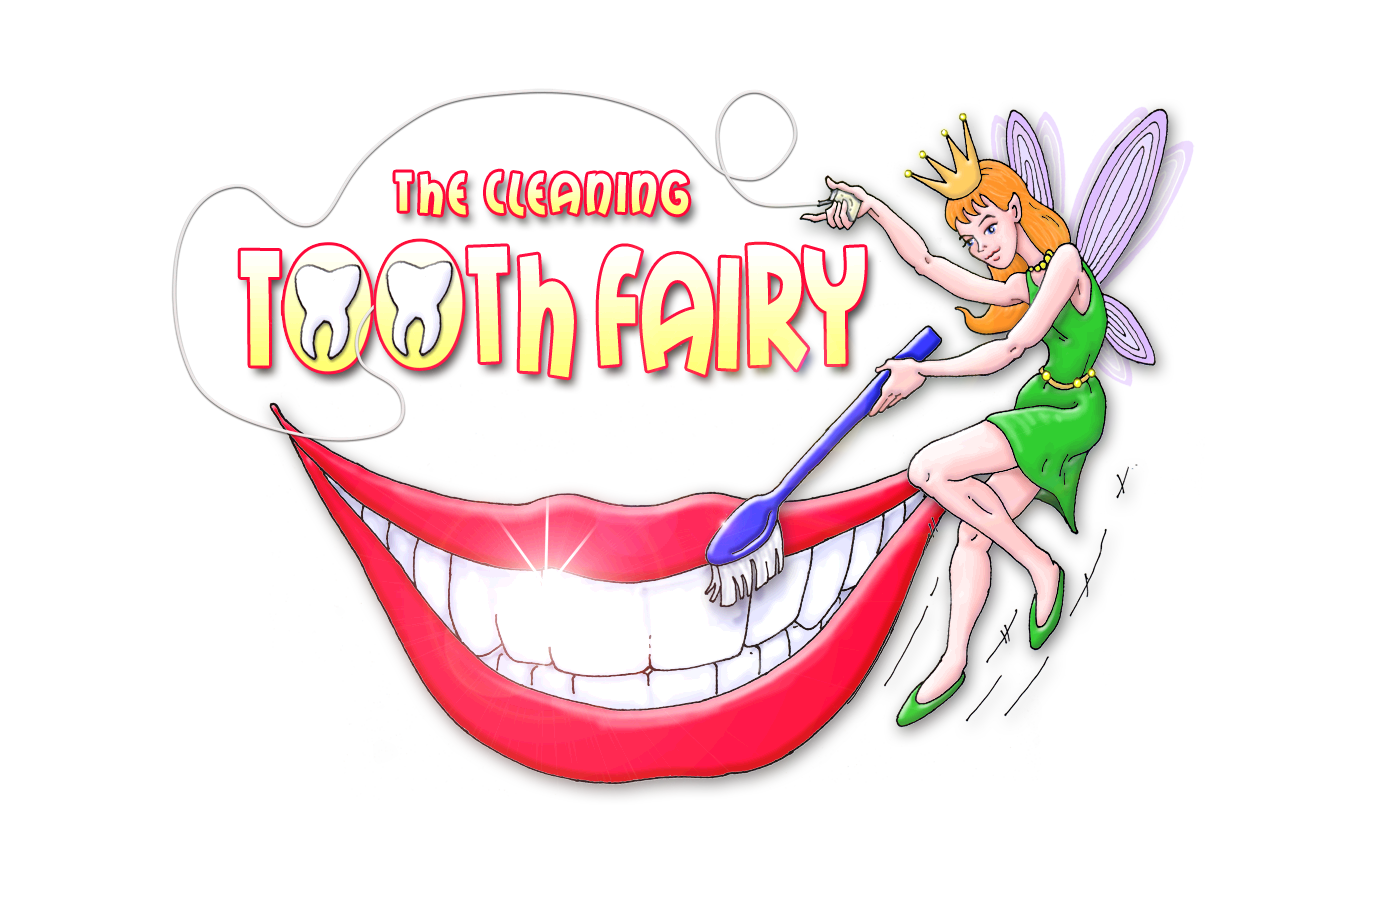 The Cleaning Tooth Fairy